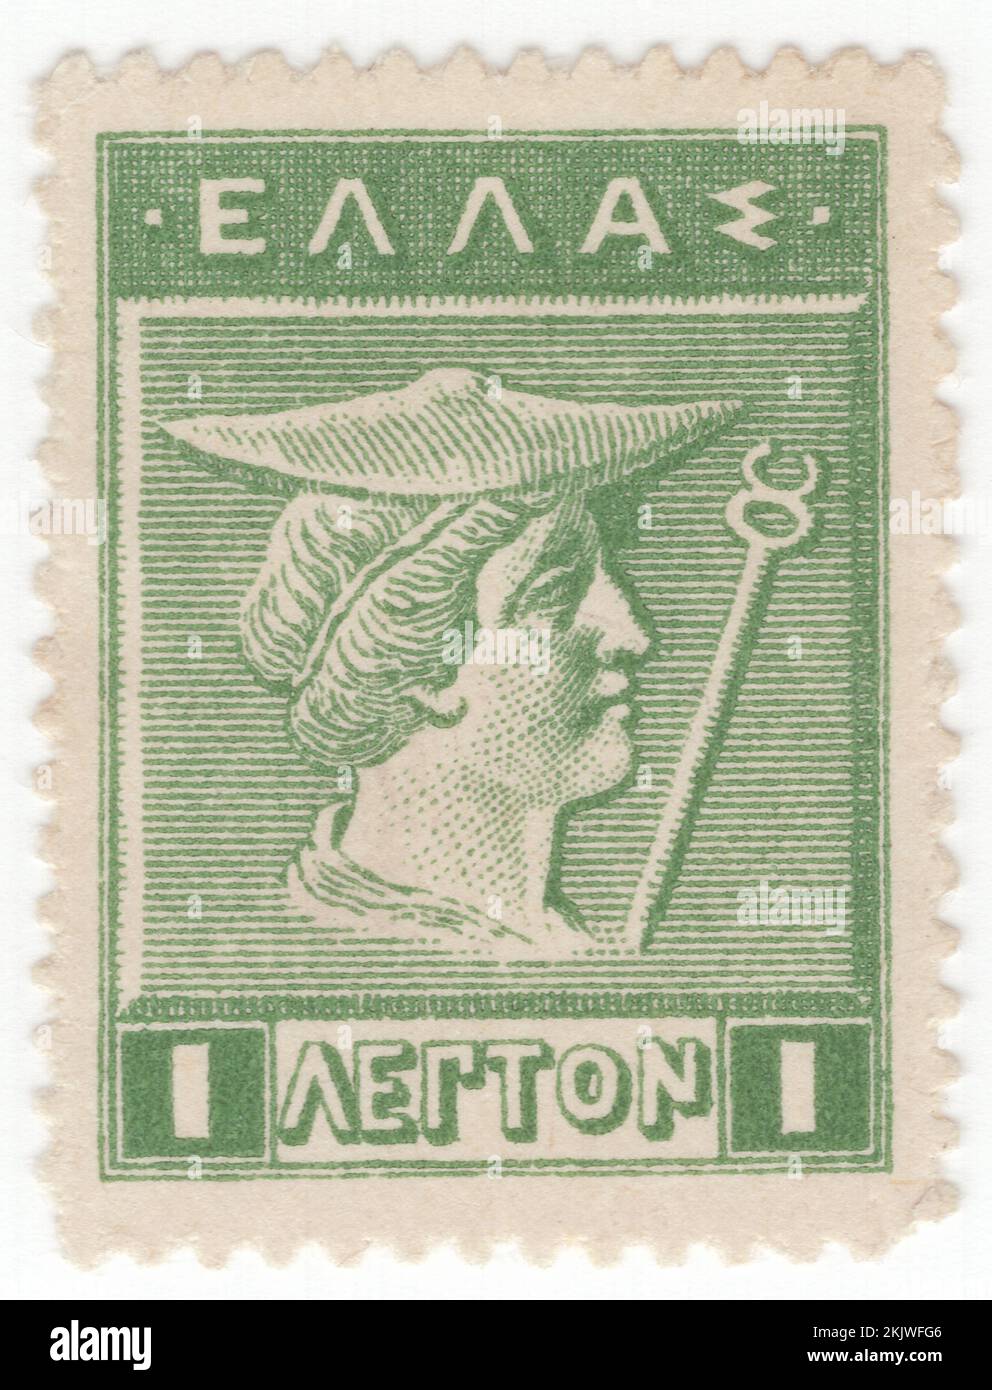 GREECE - 1911: An 1 lepta green postage stamp depicting Hermes, from Old Cretan. Designs are from Cretan and Arcadian coins of the 4th Century, B.C., Olympian deity in ancient Greek religion and mythology. Member of the Twelve Olympians. Hermes is considered the herald of the gods. He is also considered the protector of human heralds, travellers, thieves, merchants, and orators. He is able to move quickly and freely between the worlds of the mortal and the divine, aided by his winged sandals. Hermes plays the role of the psychopomp or 'soul guide'—a conductor of souls into the afterlife Stock Photo